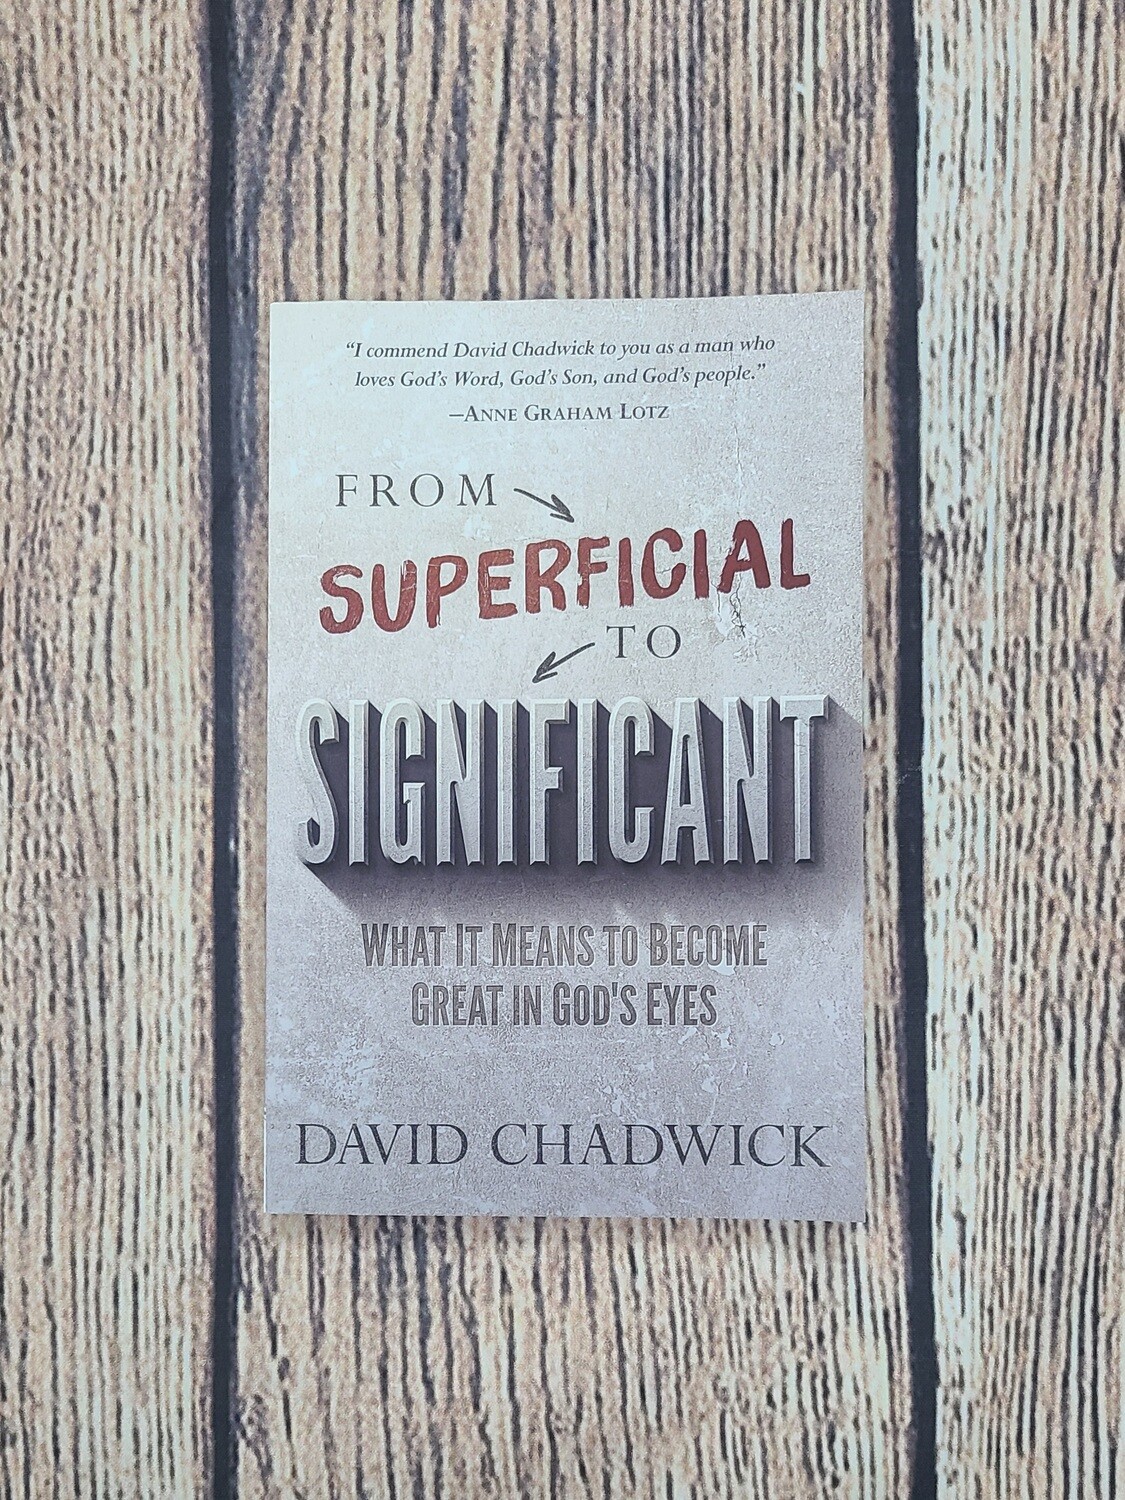 From Superficial to Significant: What it Means to Become Great in God's Eyes by David Chadwick